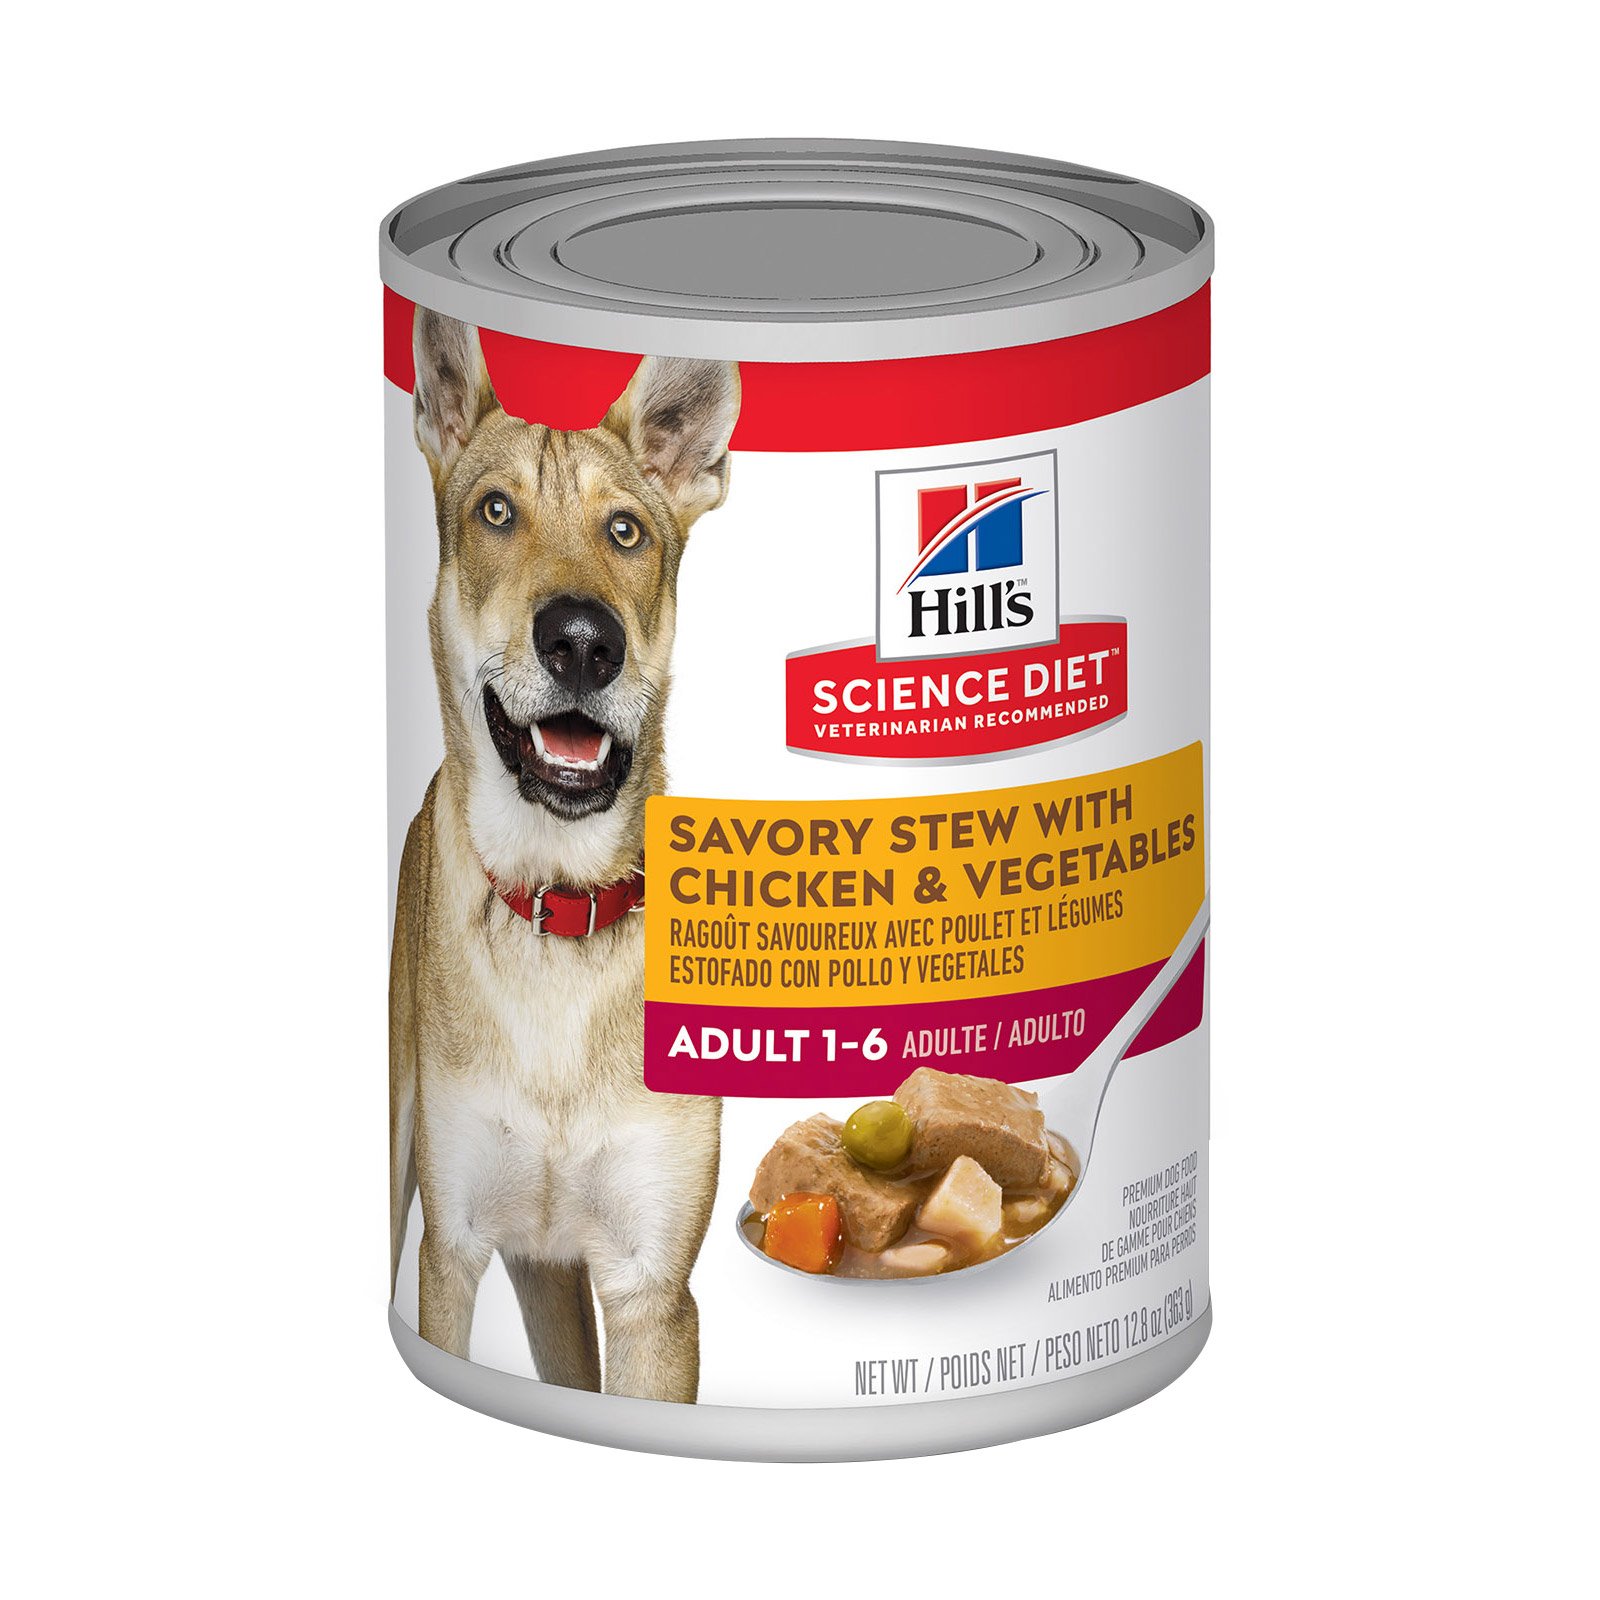 Hill's Science Diet Adult Savory Stew Chicken & Vegetable Canned Dog Food